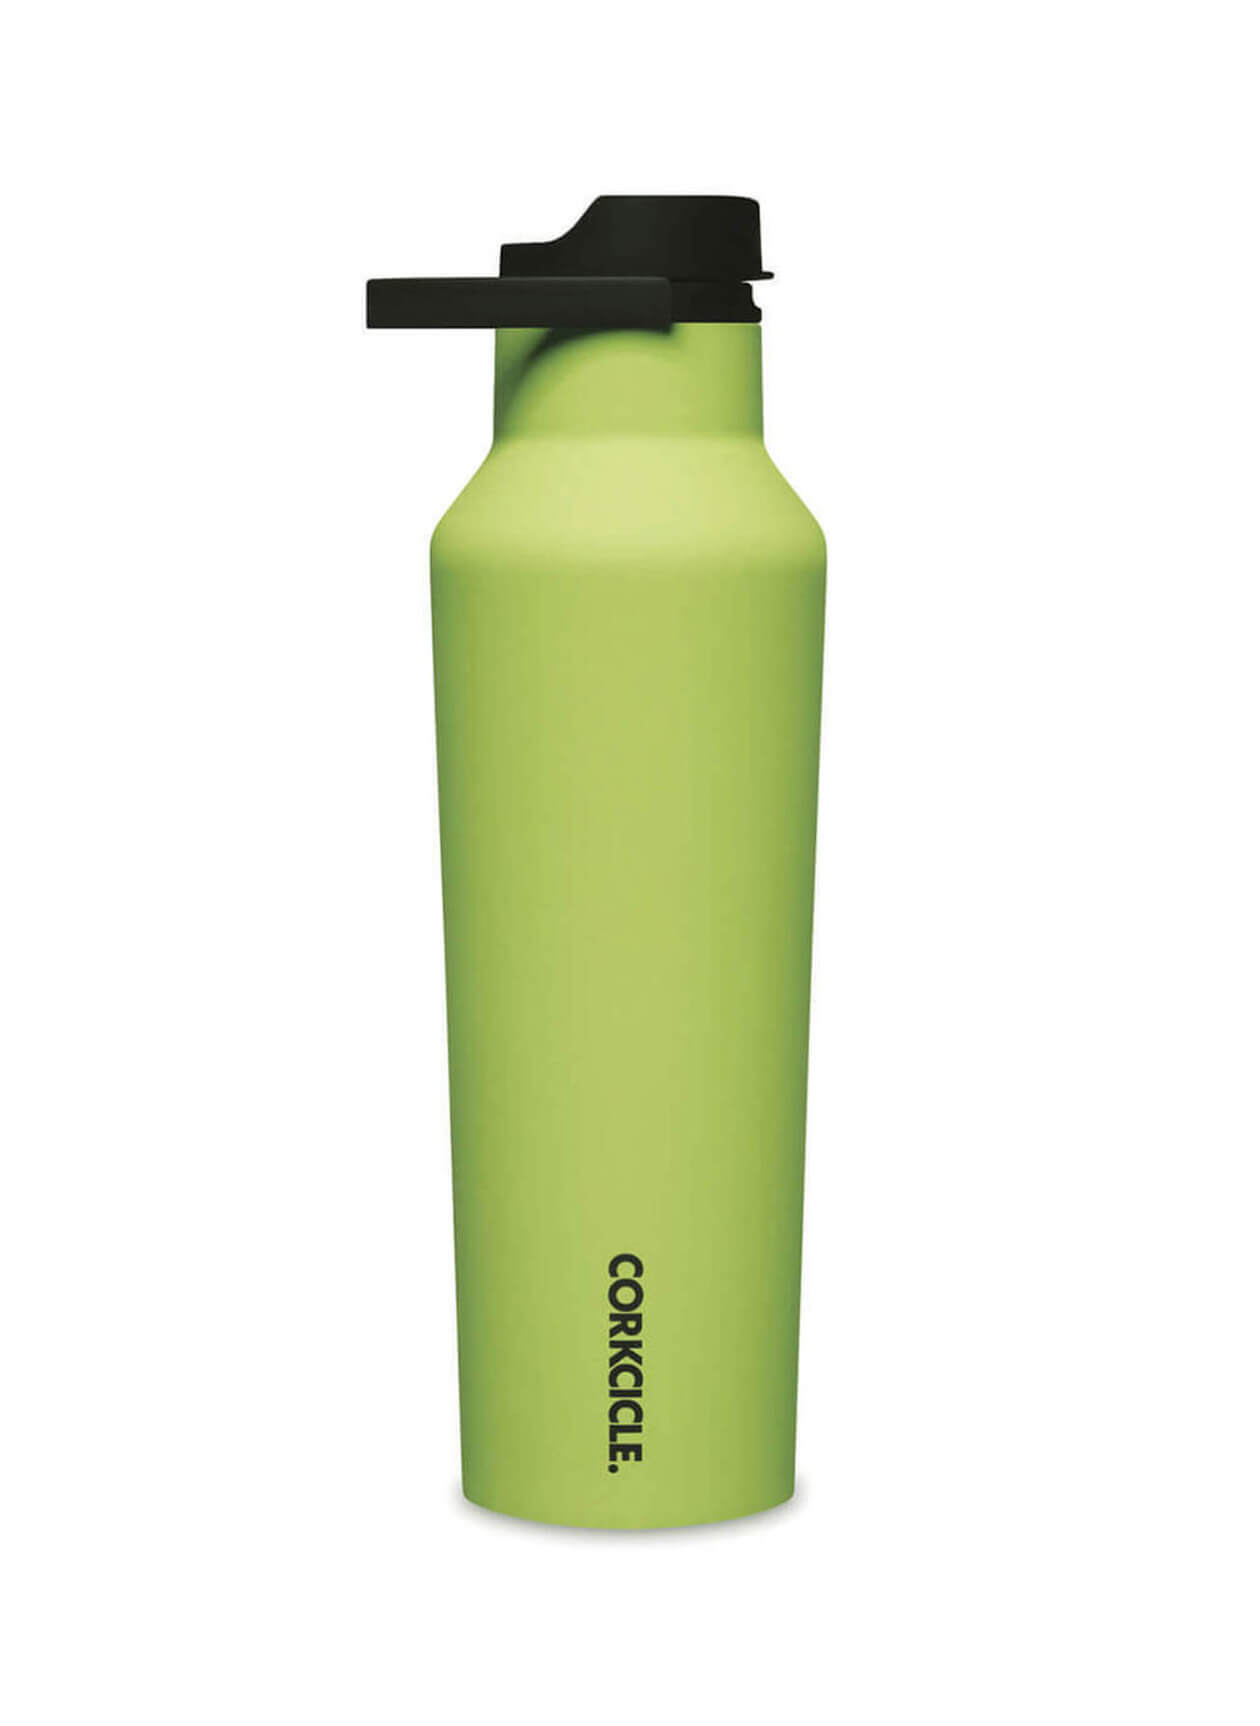 Printed Corkcicle Canteen Water Bottles (25 Oz.)